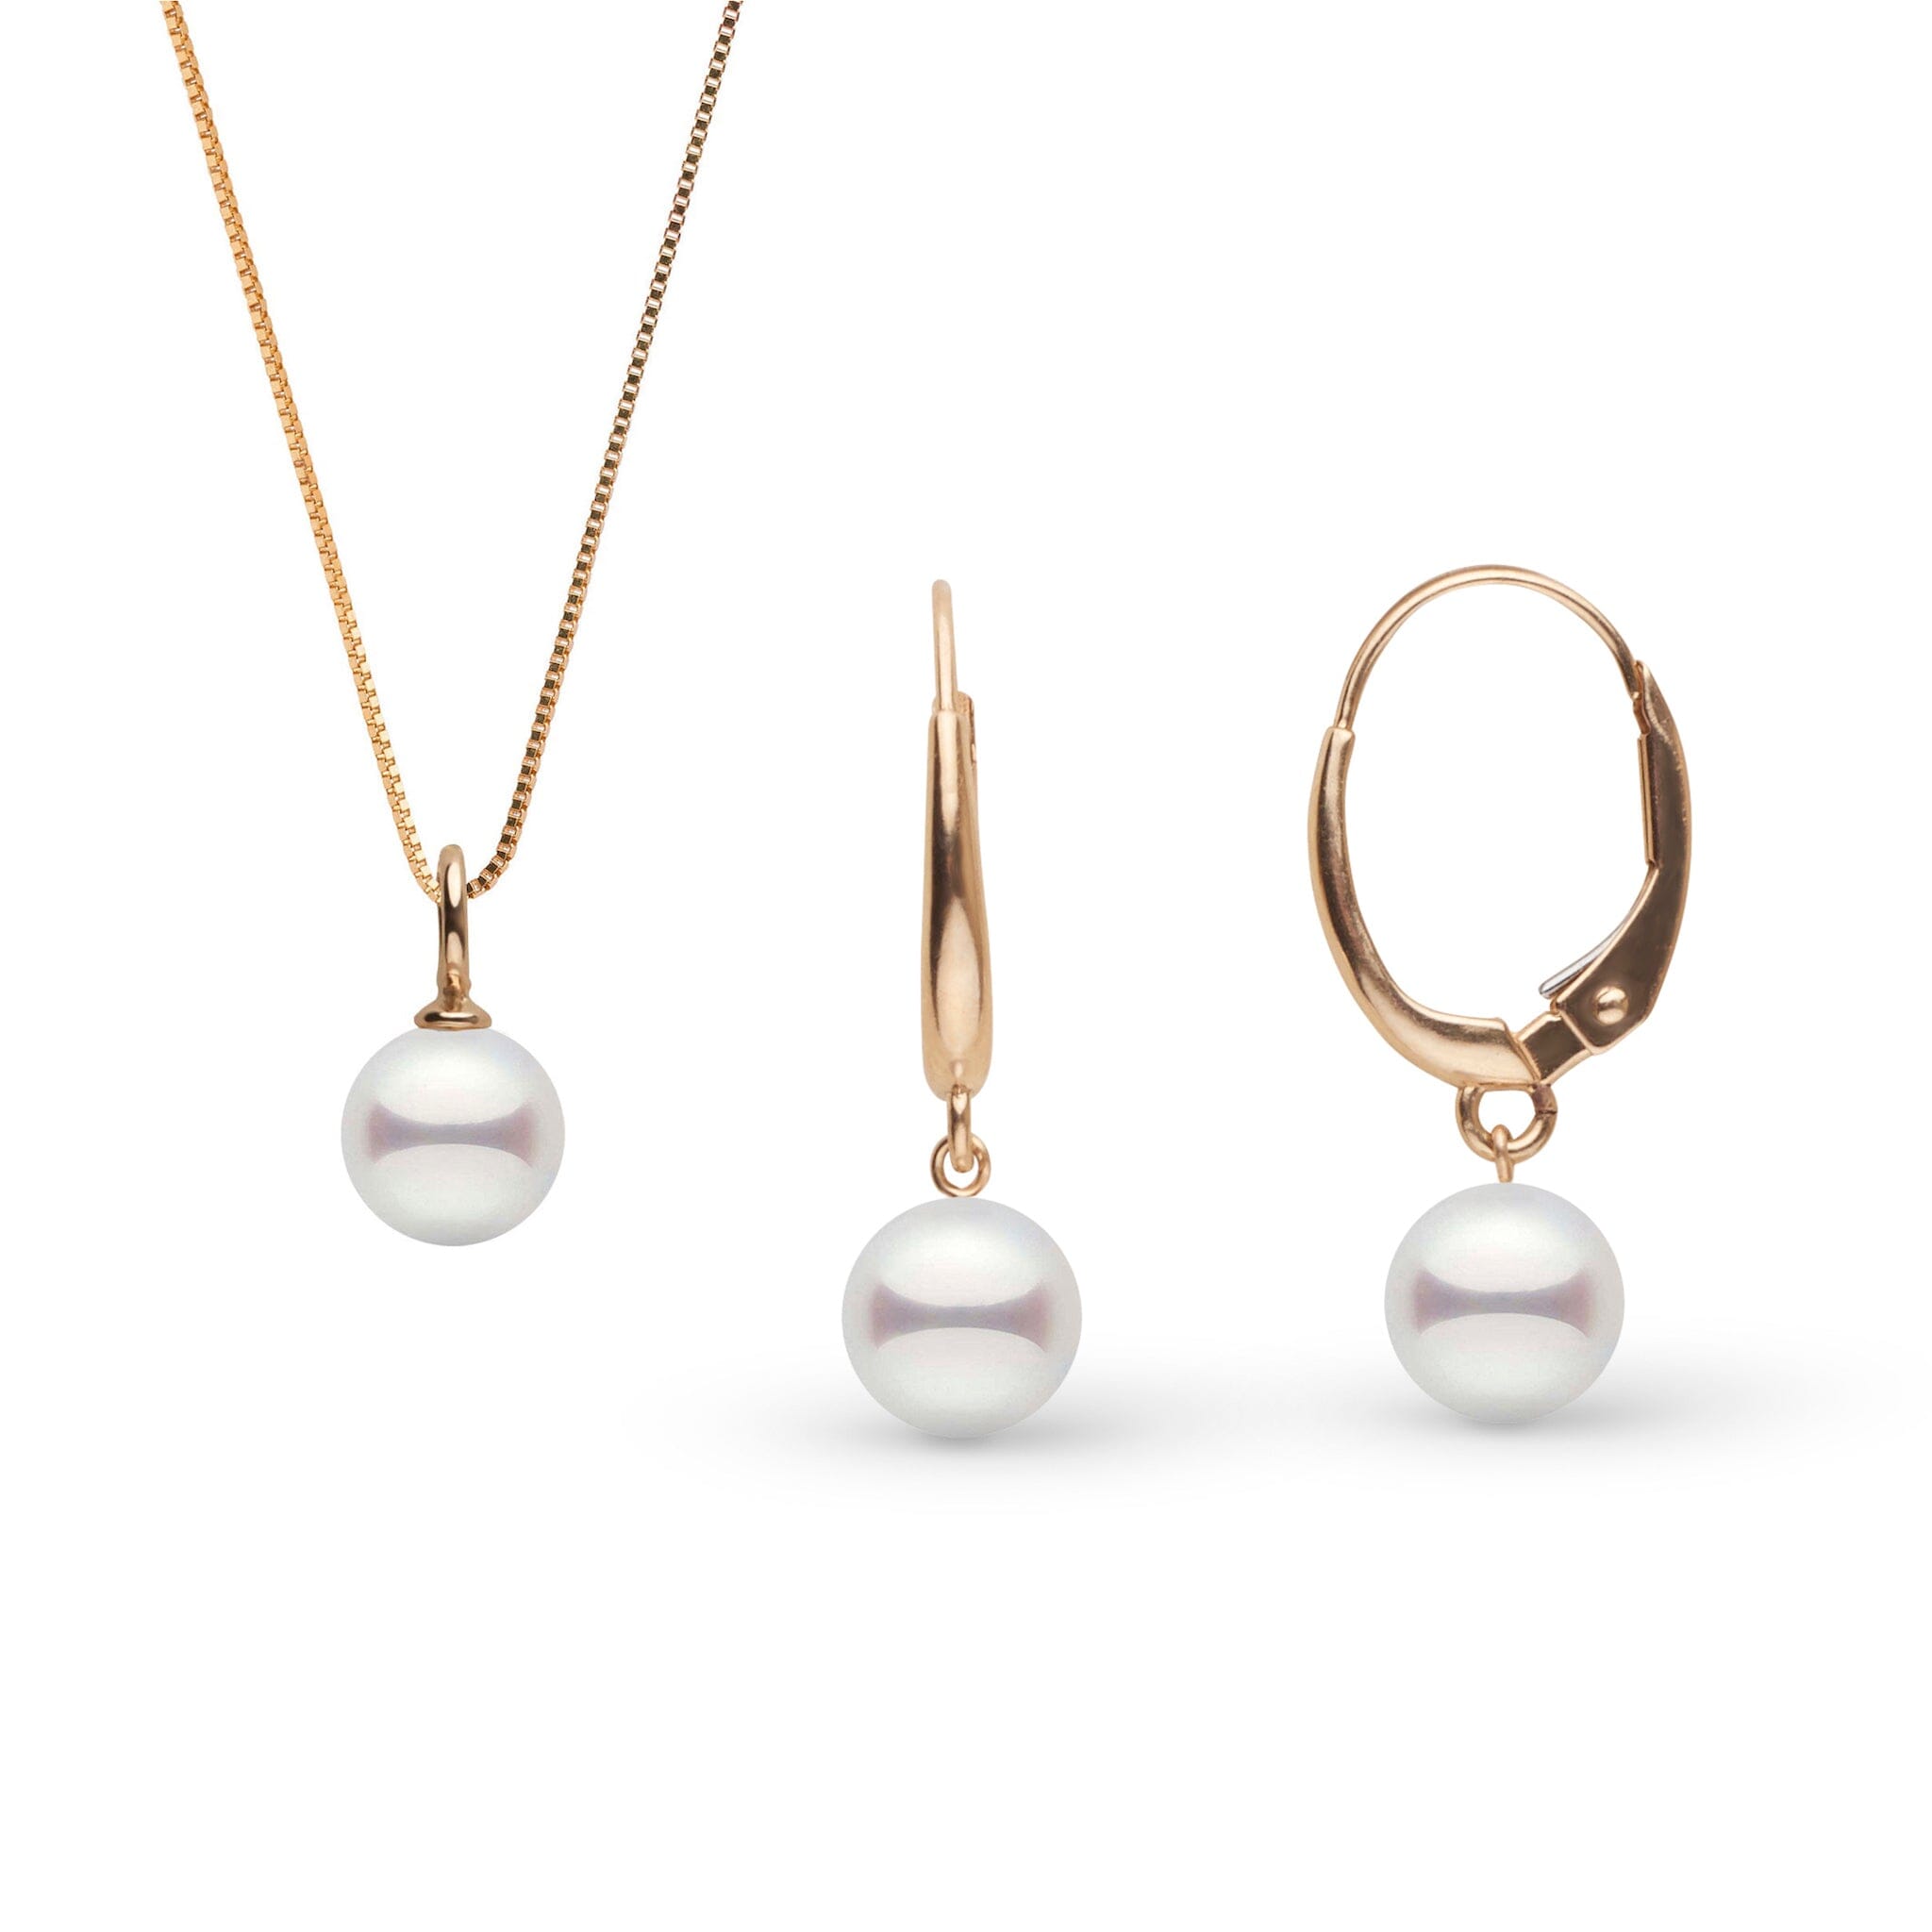 7.0-7.5 mm Akoya Pearl Muse Collection Pendant and Earrings Set